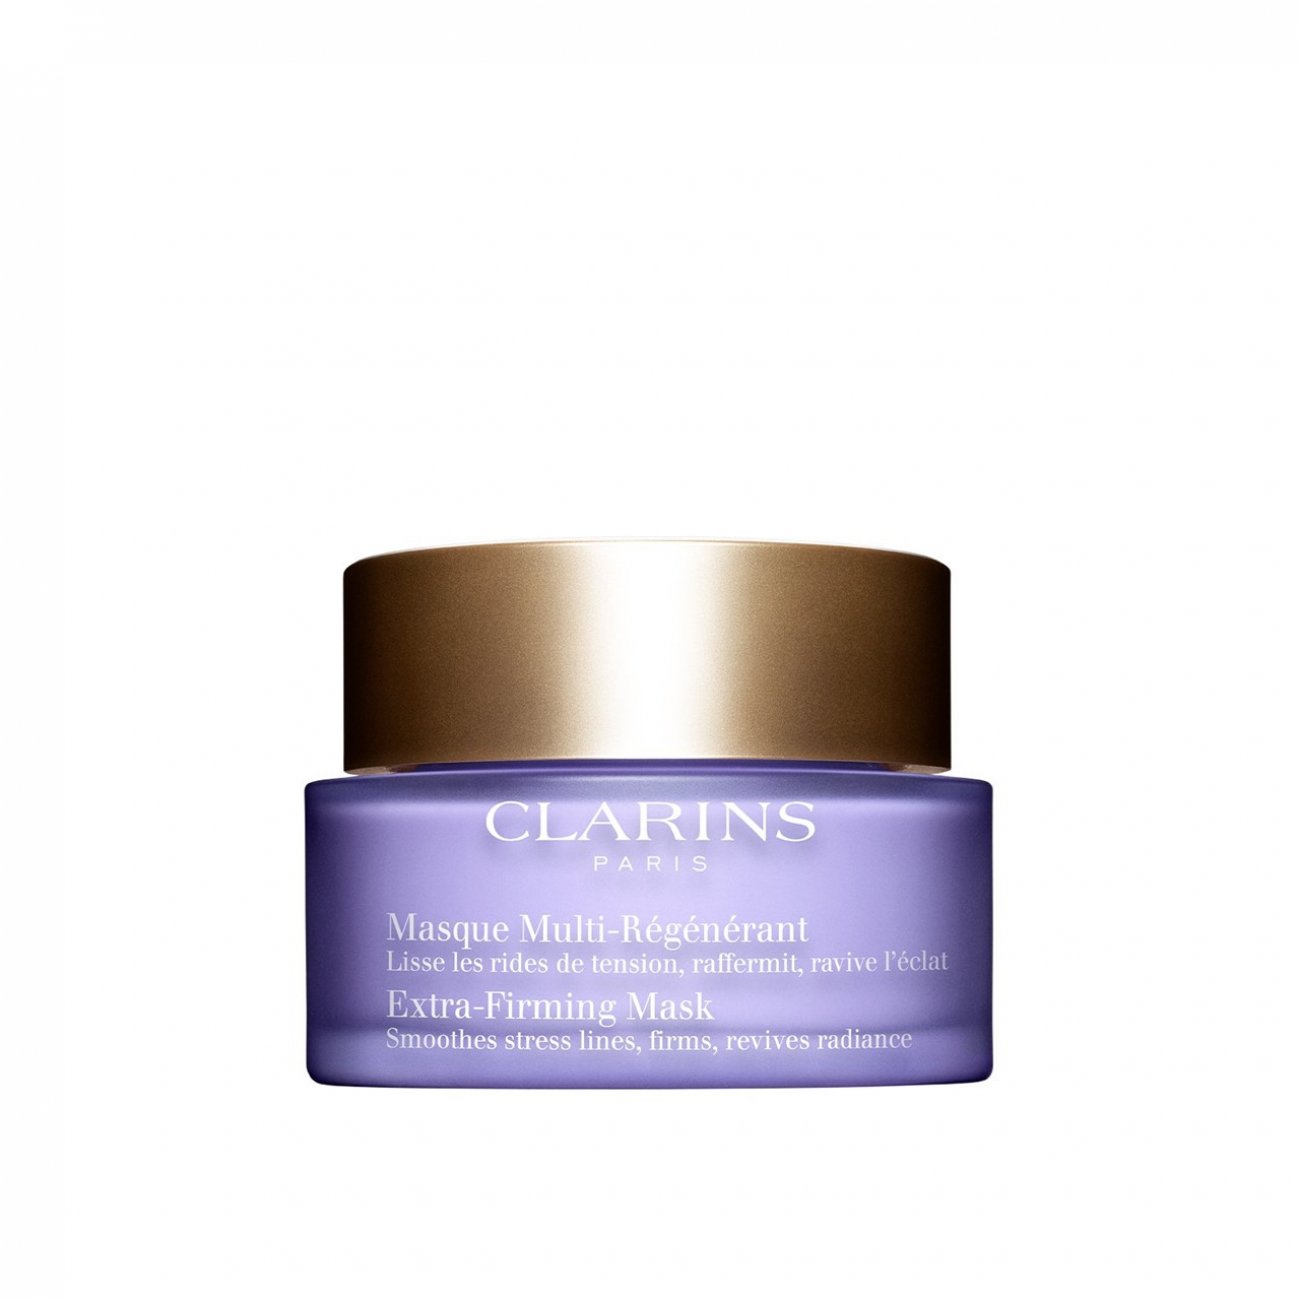 Buy Clarins Extra-Firming Mask 75ml (2.5 ·